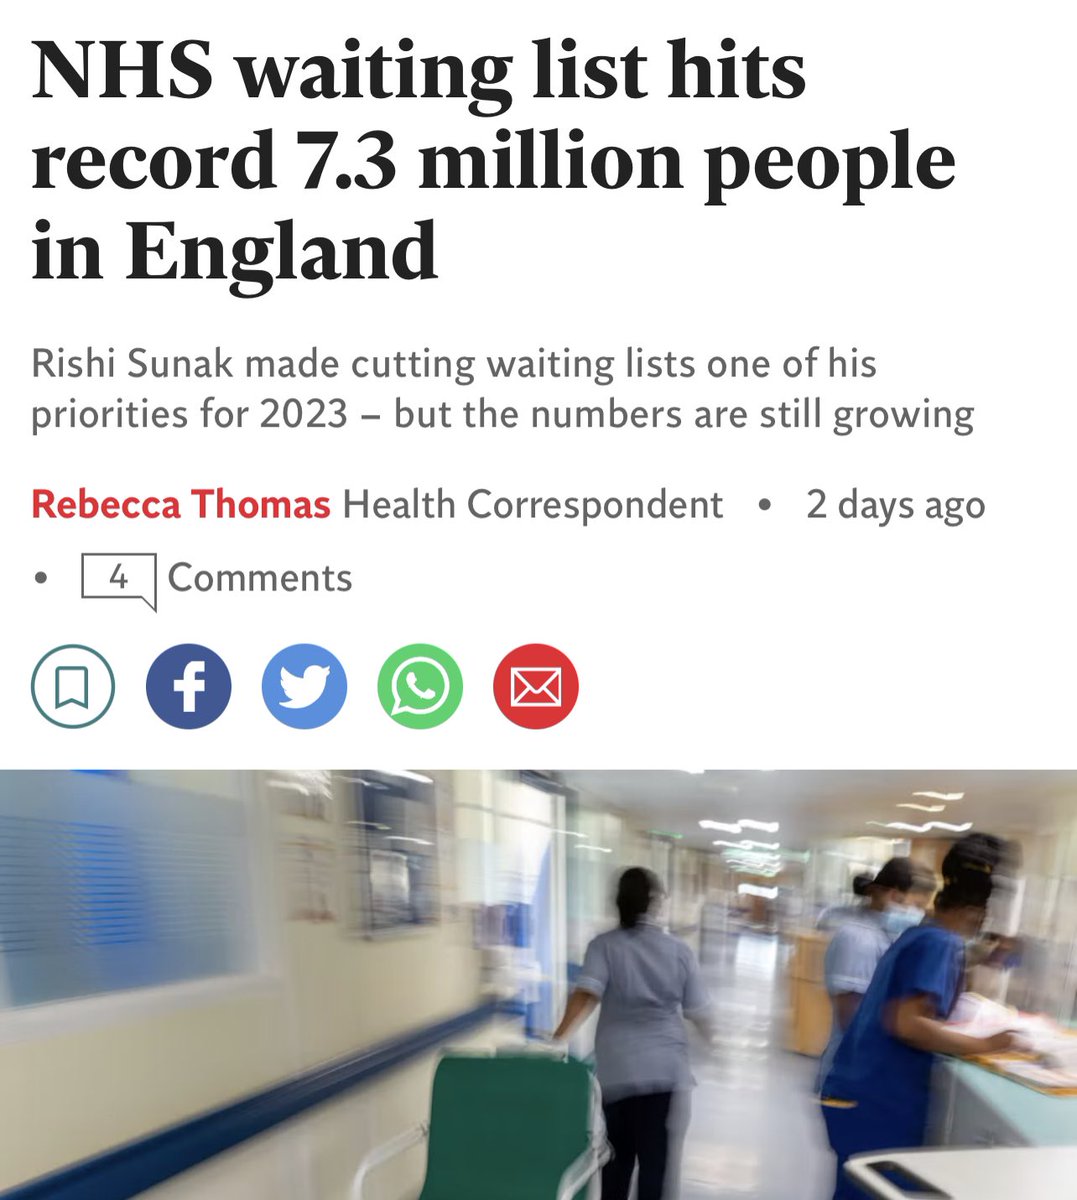 Dear @Conservatives, 13 years ago you inherited the #1 ranked healthcare system on the planet and look what you've done. We now have the longest GP, A&E, outpatient, and cancer waiting times in NHS history. 7.3m people long. You don't deserve power. You deserve prison. #SOSNHS